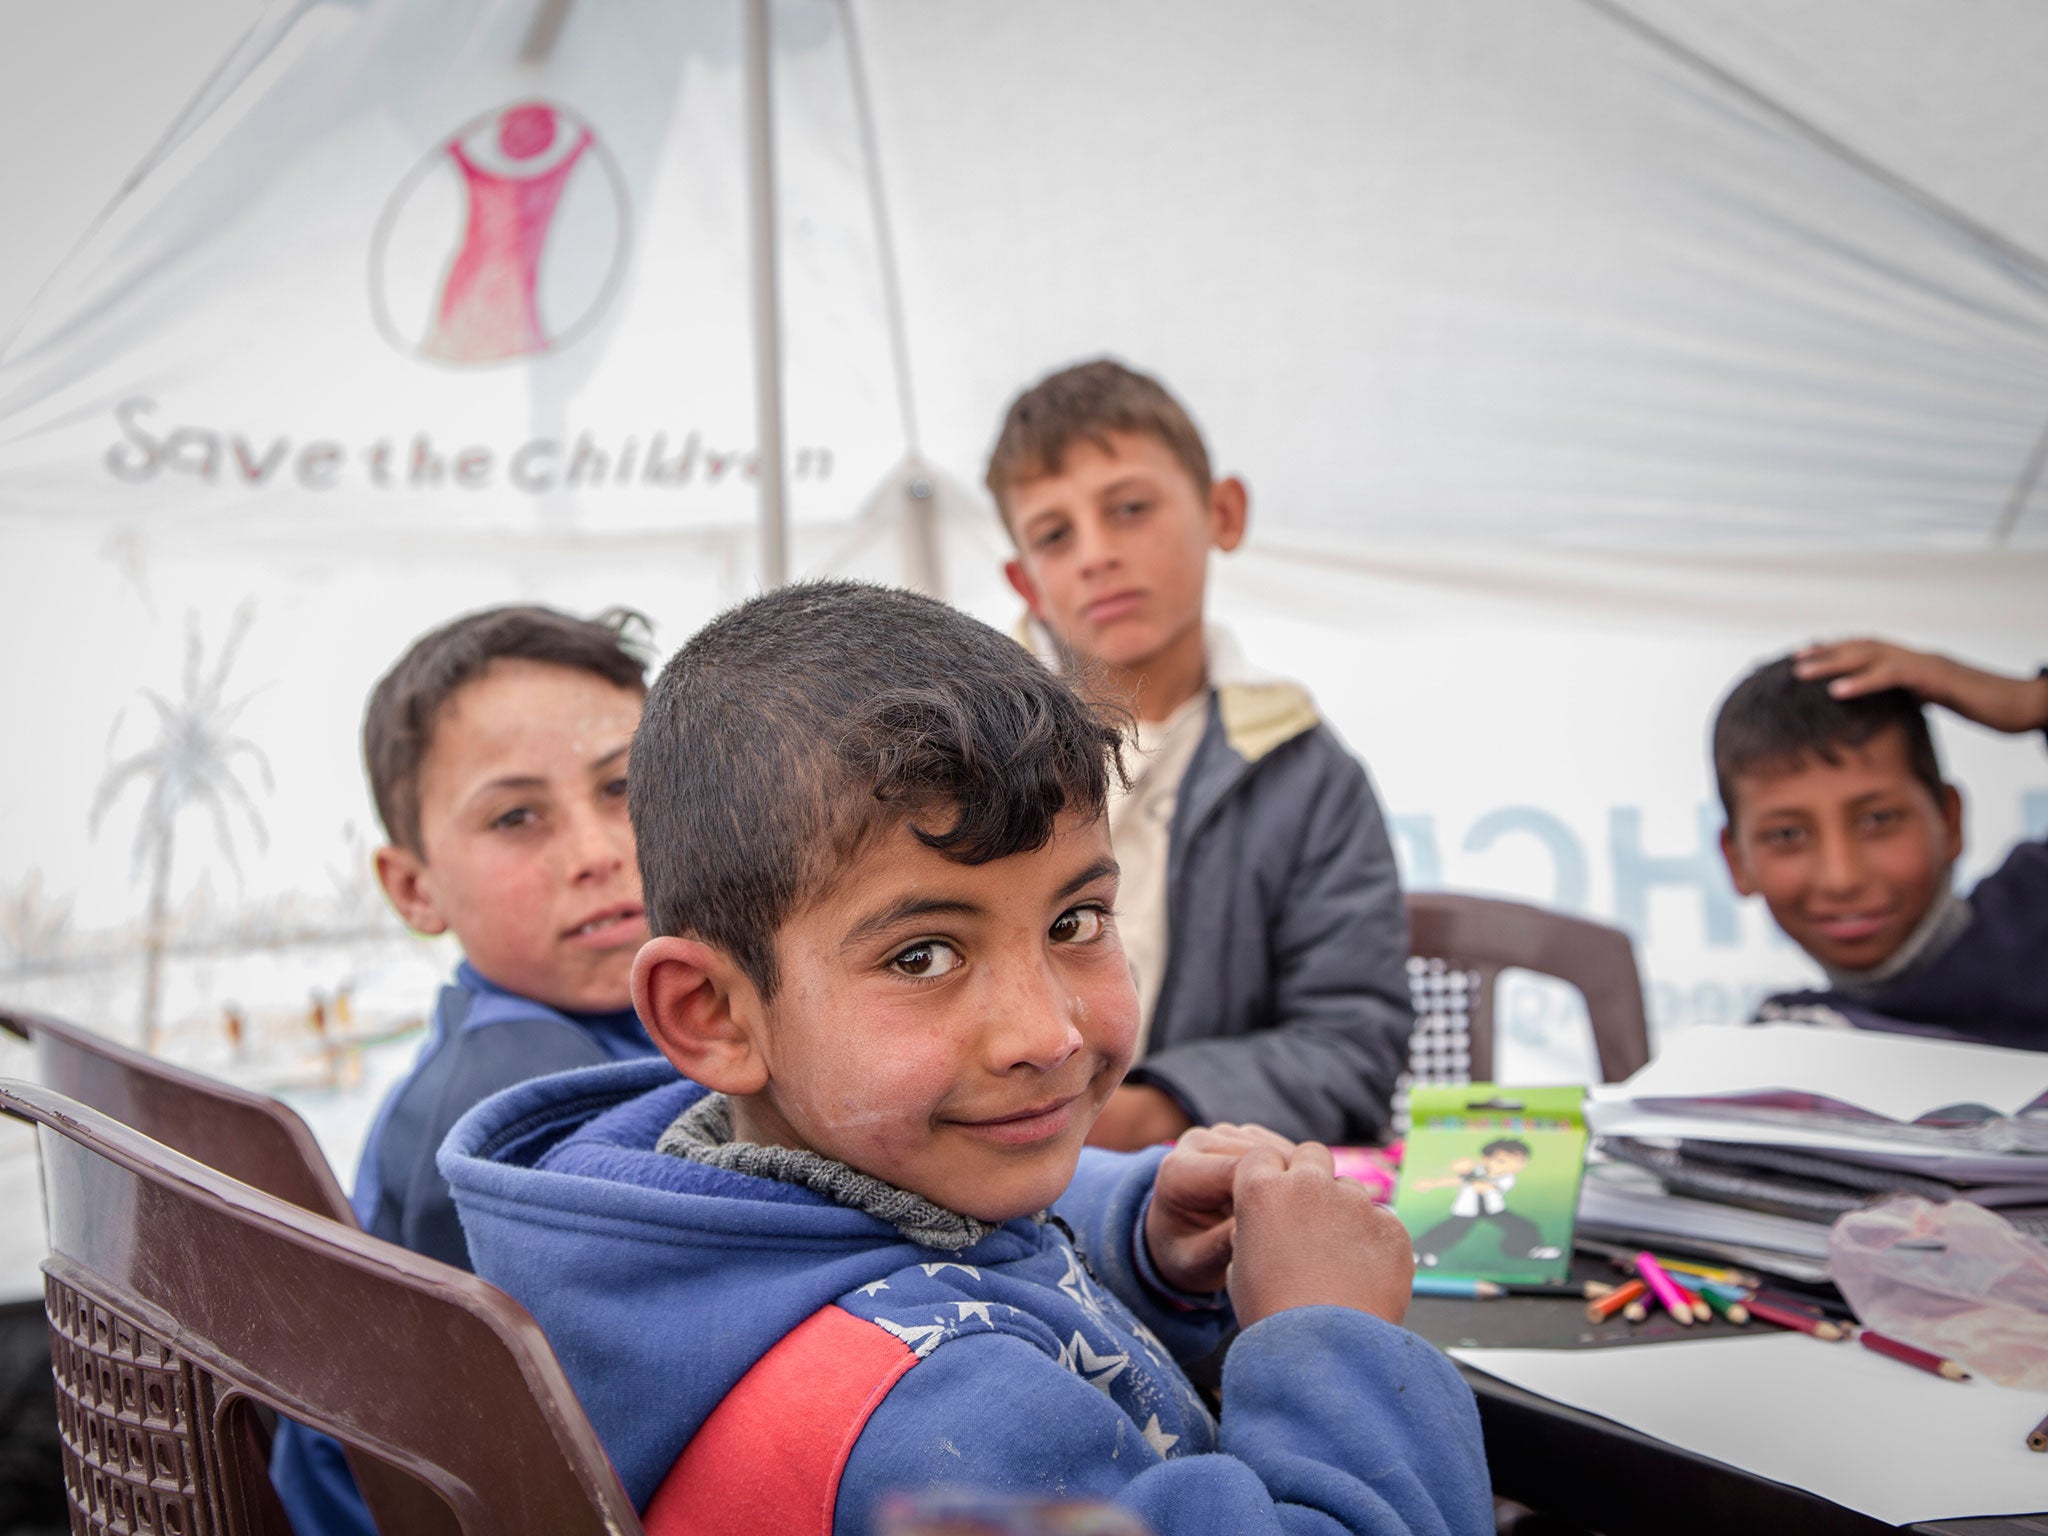 Save the Children runs spaces for children in refugee camps where they can draw, play and listen to music